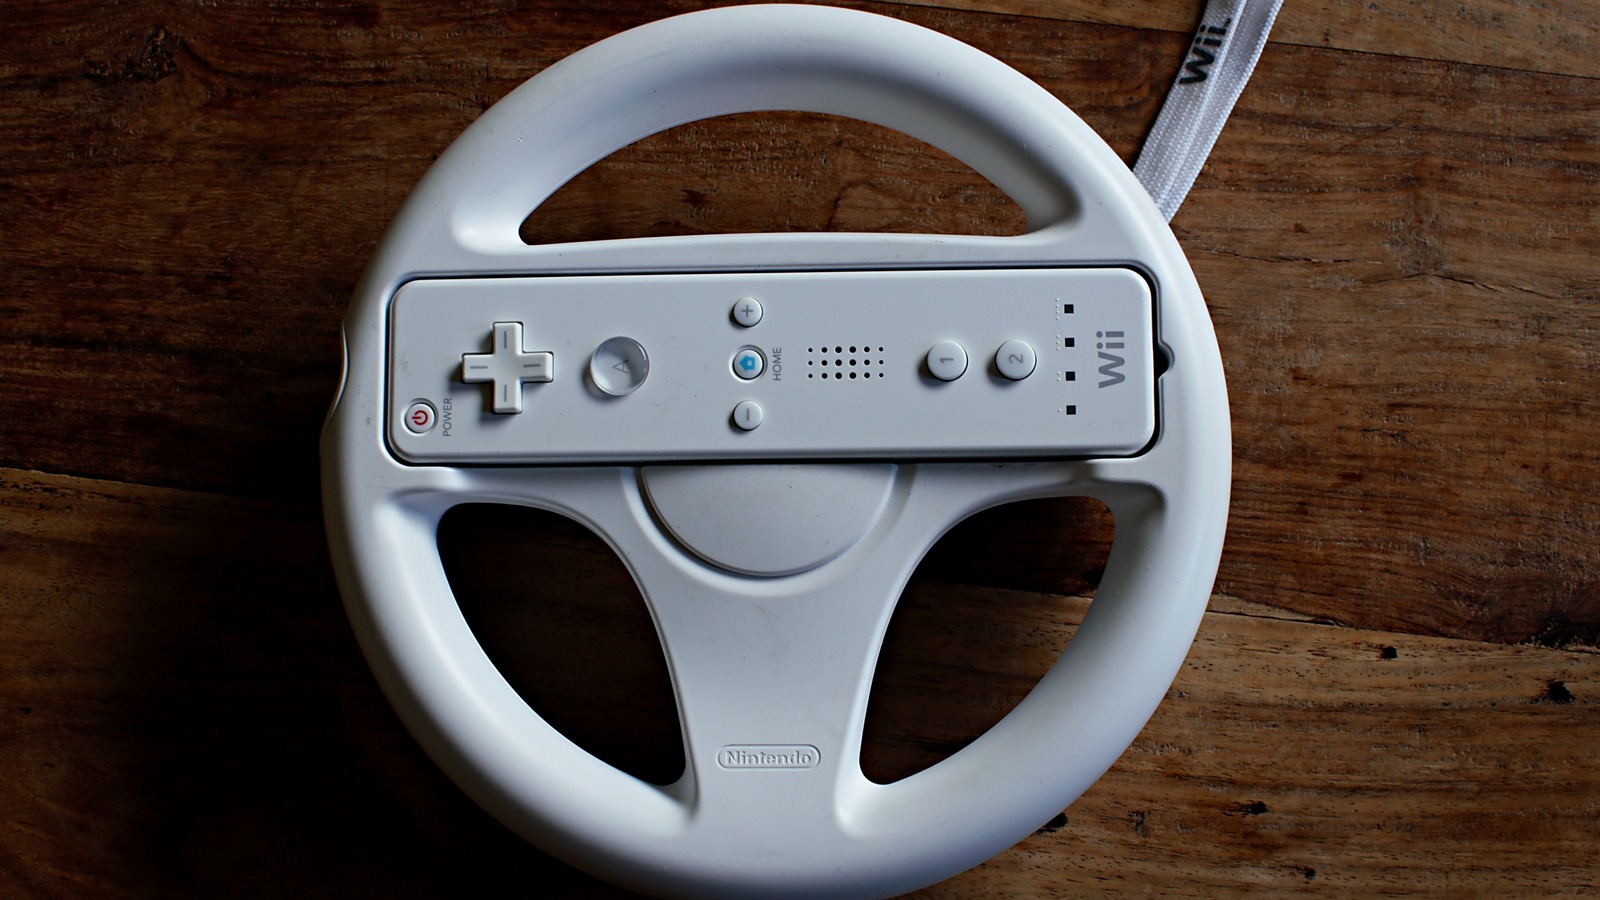 10 Of The Weirdest Controller Accessories Ever Made For The Nintendo Wii